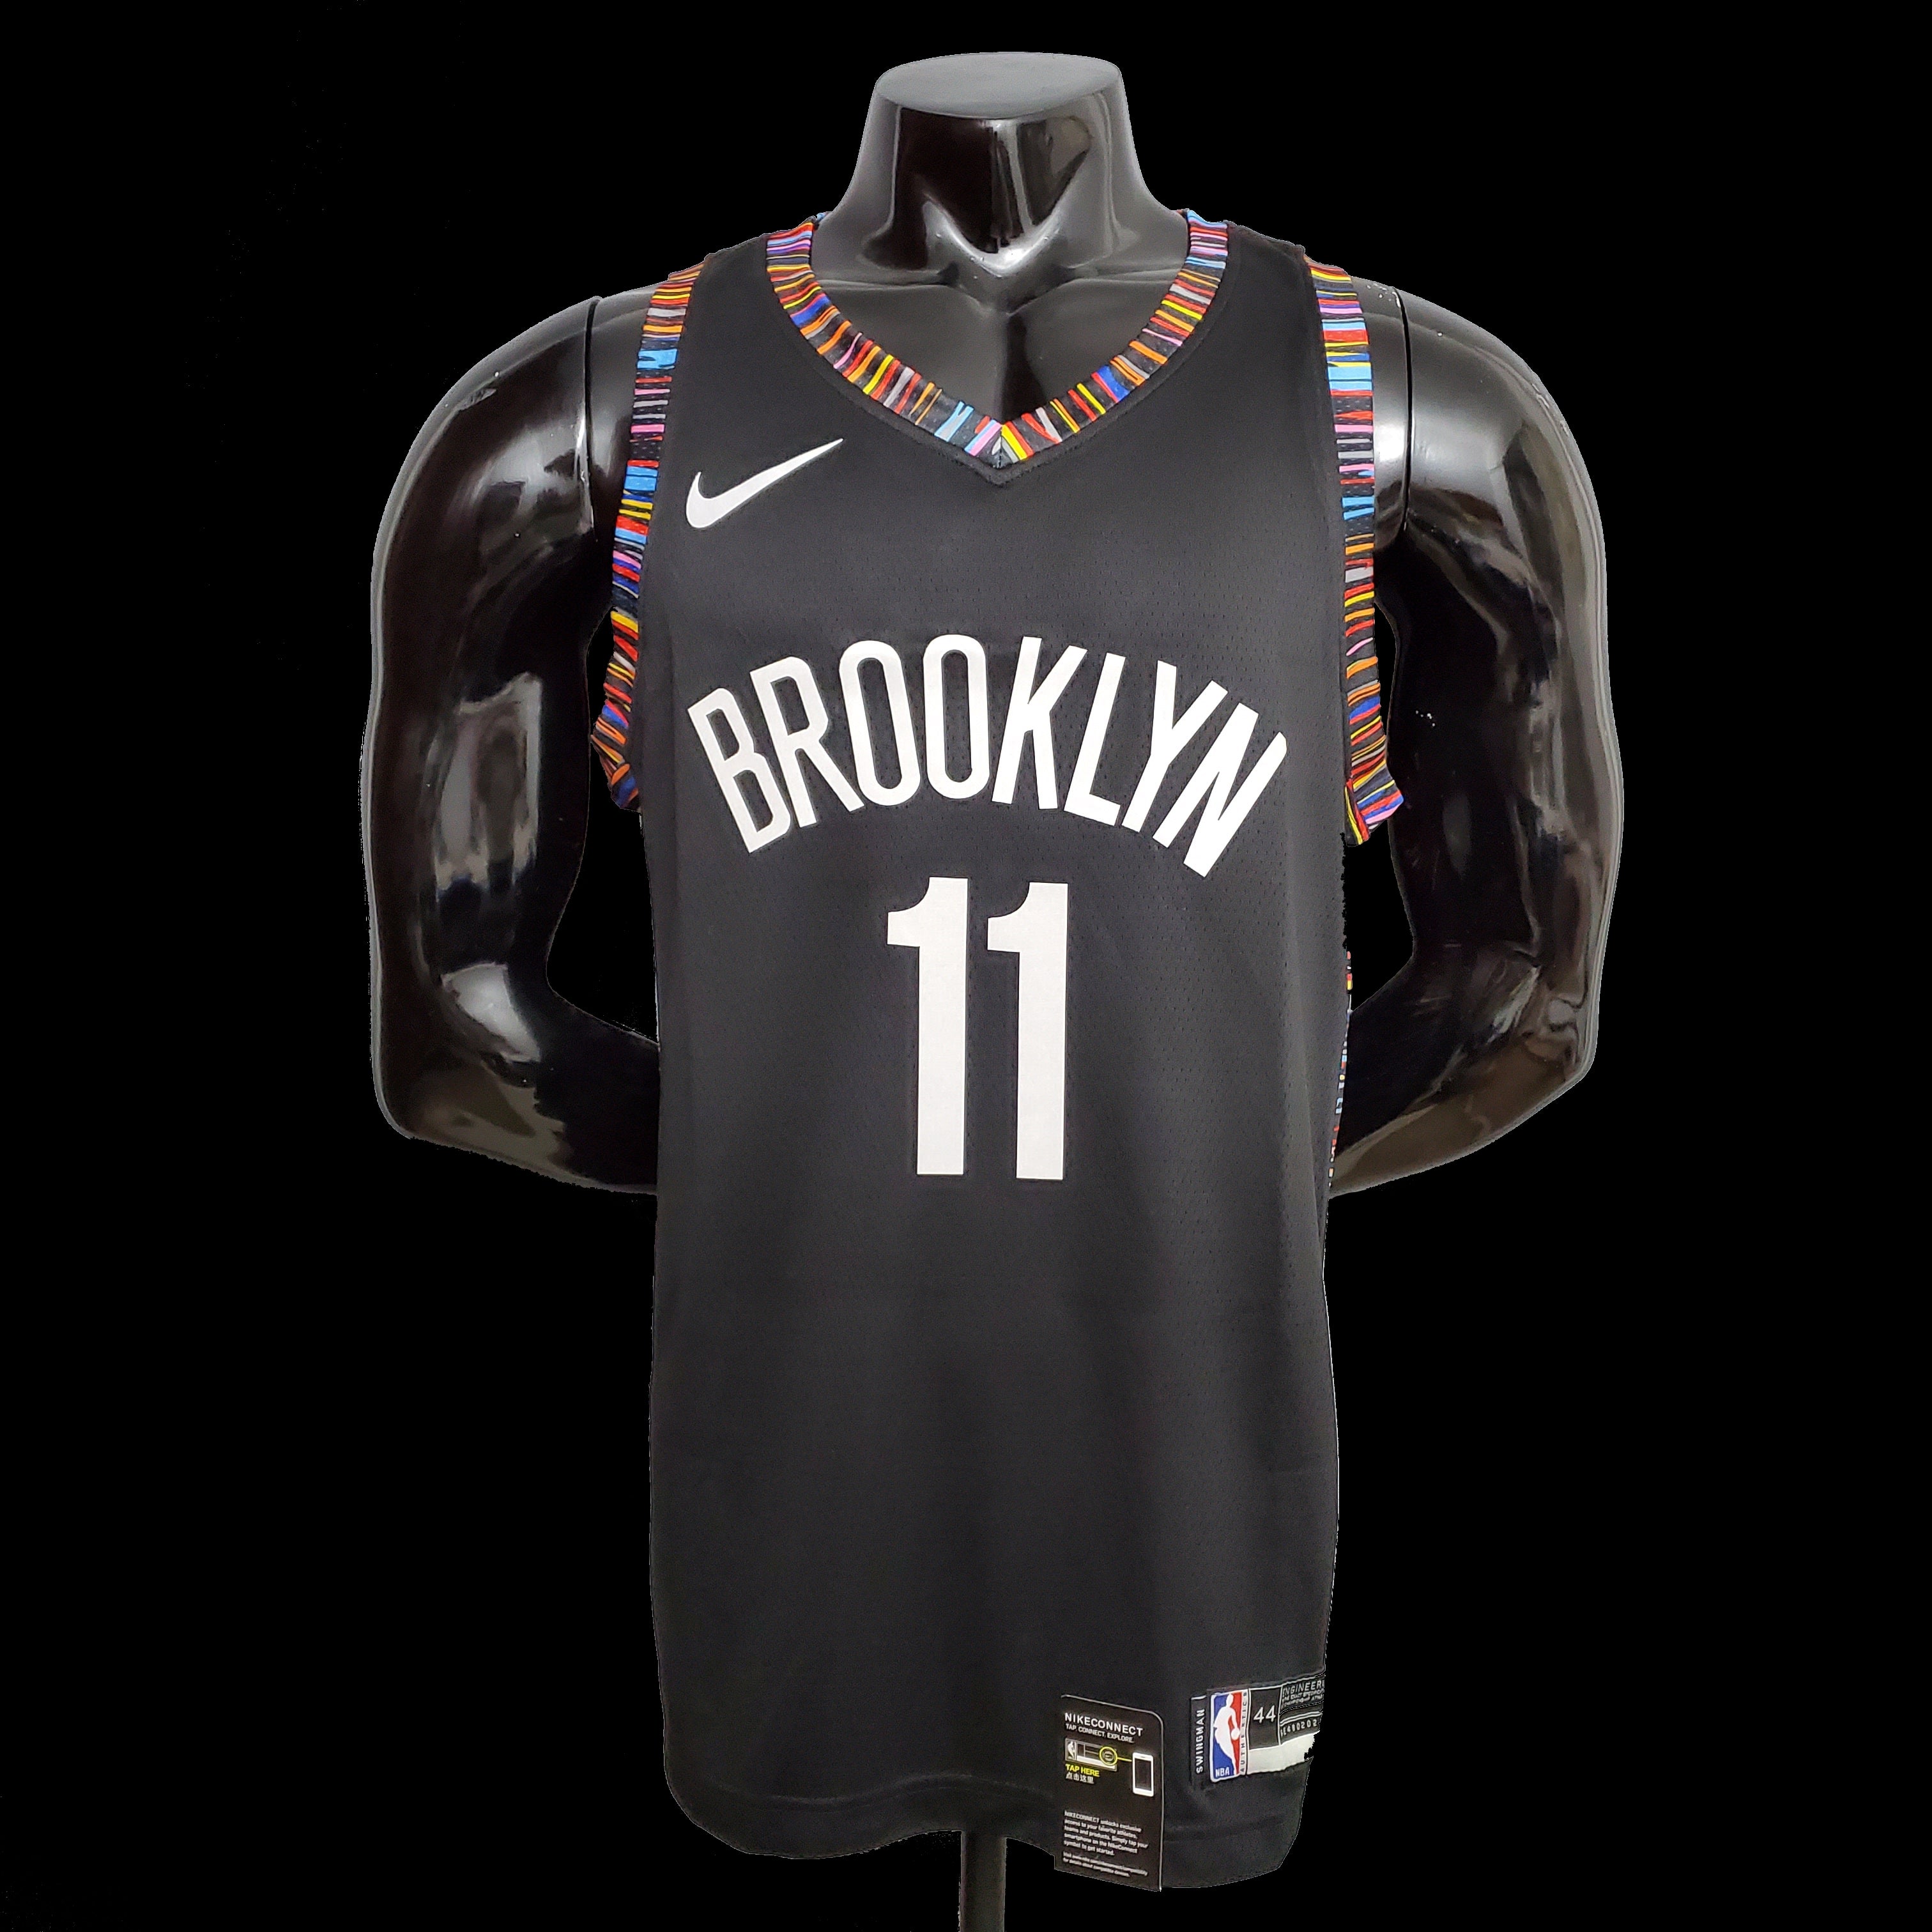 NBA_ Stitched Basketball 7 Kevin Durant Jersey 11 Kyrie Irving